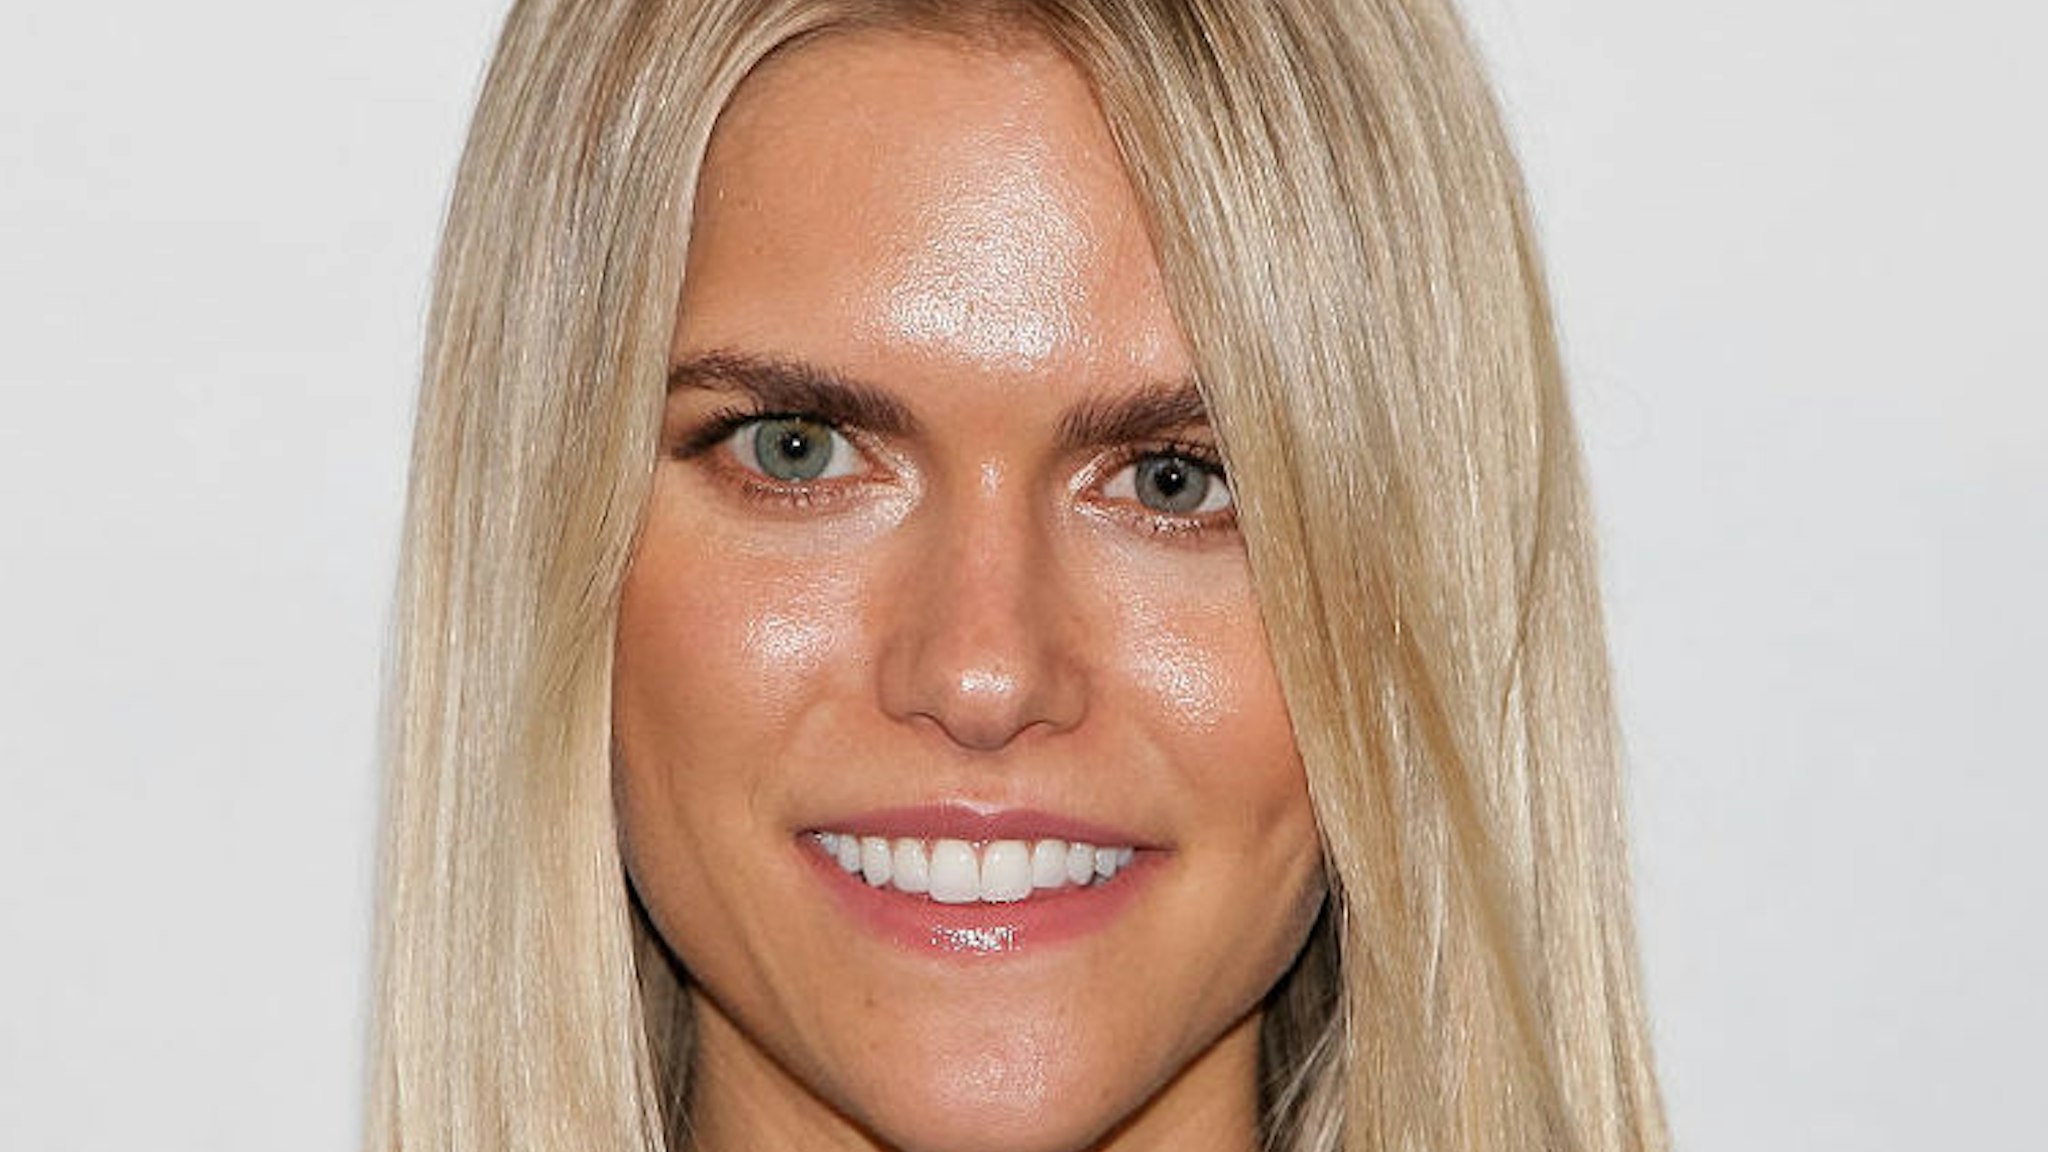 Fashion journalist and blogger Lauren Scruggs Kennedy attends the 7th Annual 'Night of Generosity' Gala benefiting generosity.org at the Beverly Wilshire Four Seasons Hotel on November 6, 2015 in Beverly Hills, California.